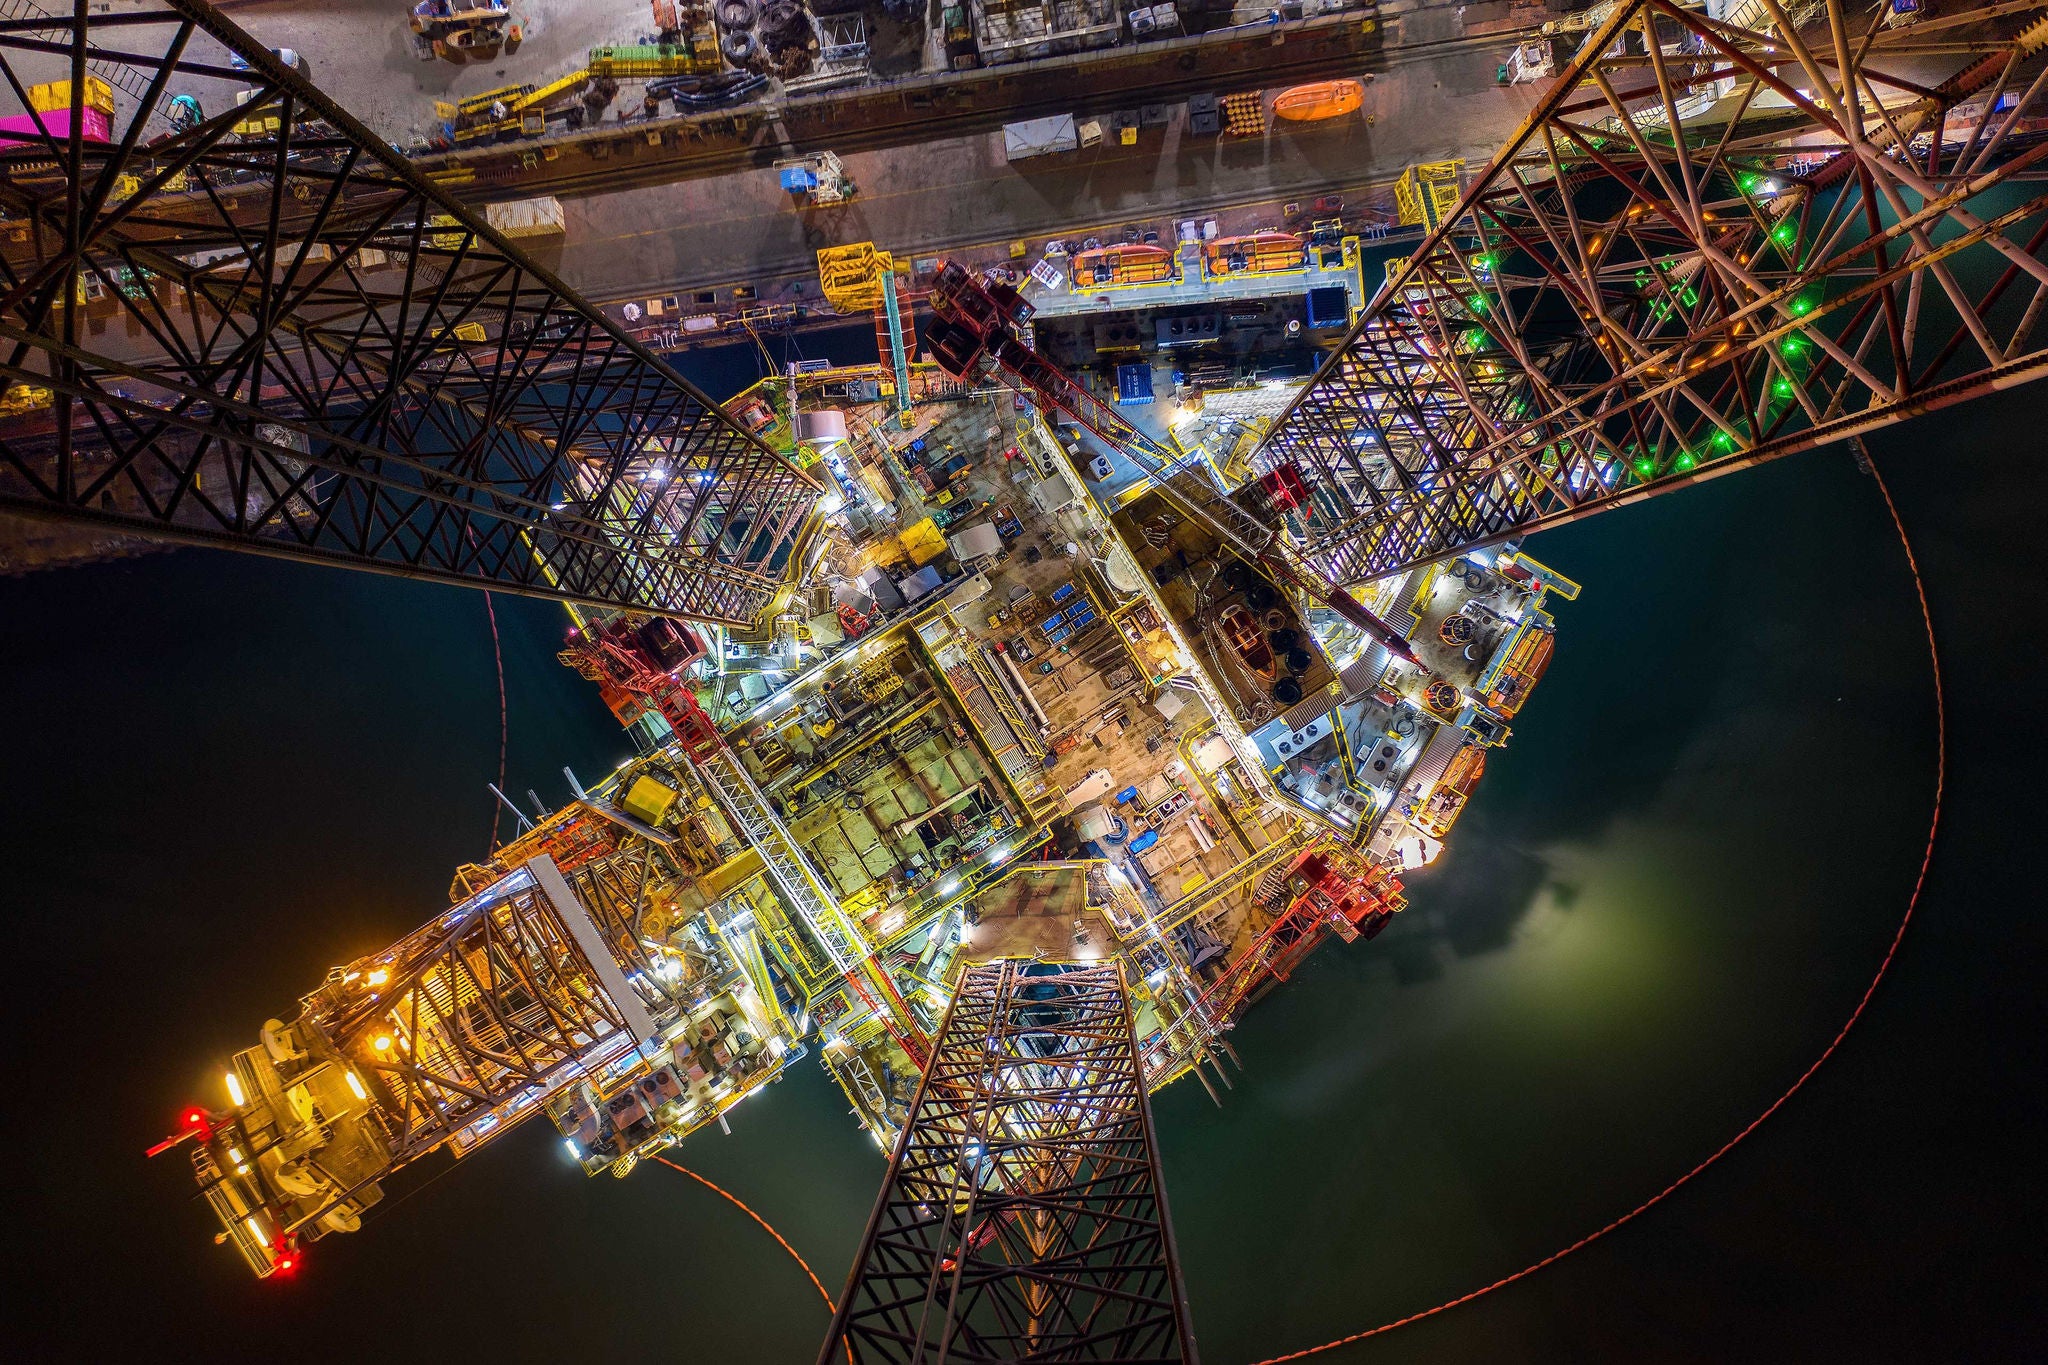 ey-oil-and-gas-jack-up-rig-at-the-yard-in-the-night-time